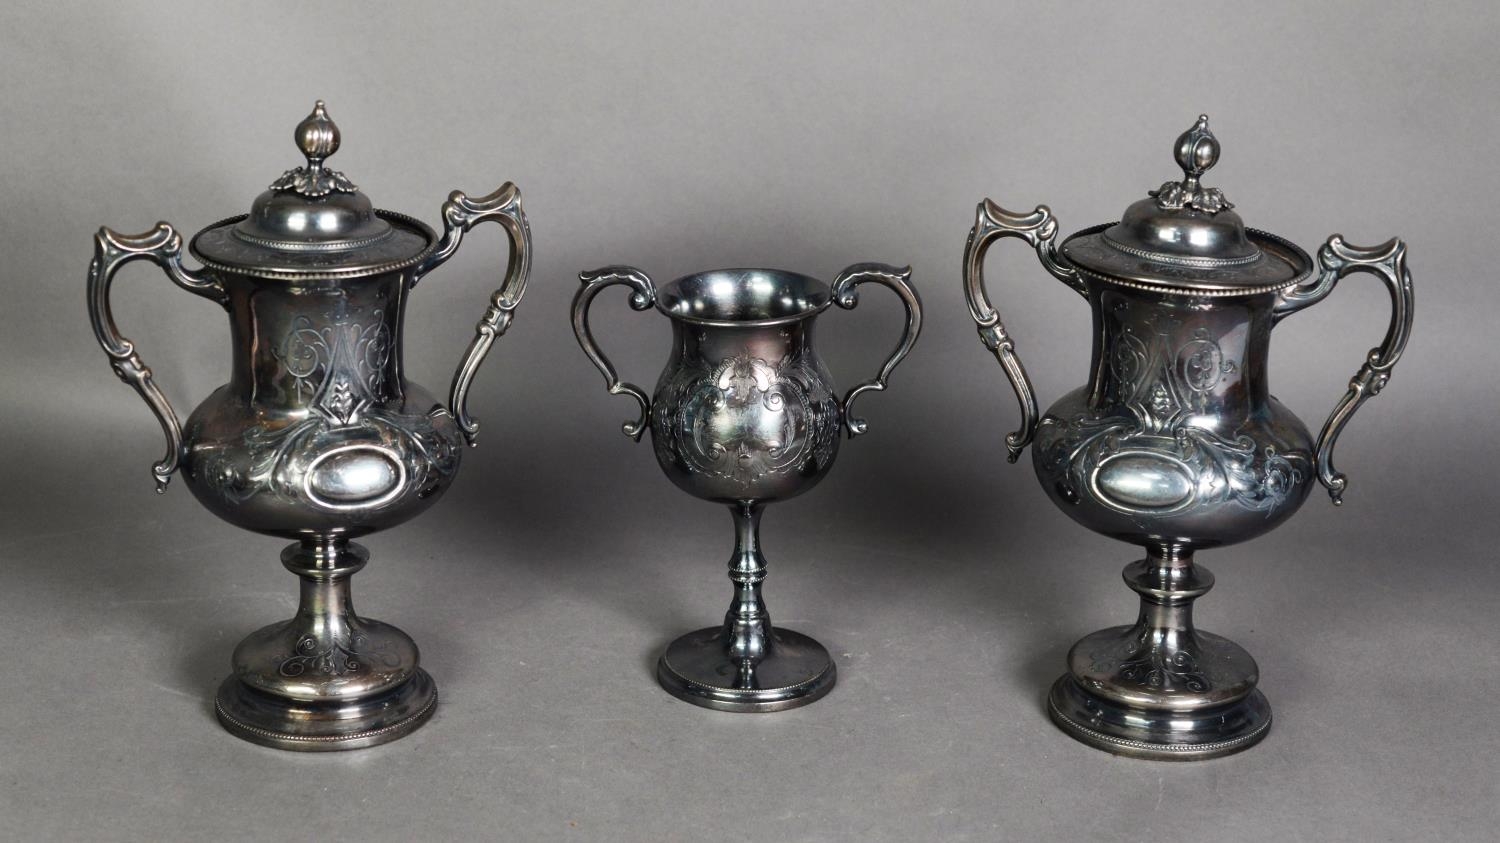 PAIR OF LATE 19th/EARLY 20th CENTURY EPBM TWO HANDLED TROPHY CUPS AND COVERS, with foliate scroll